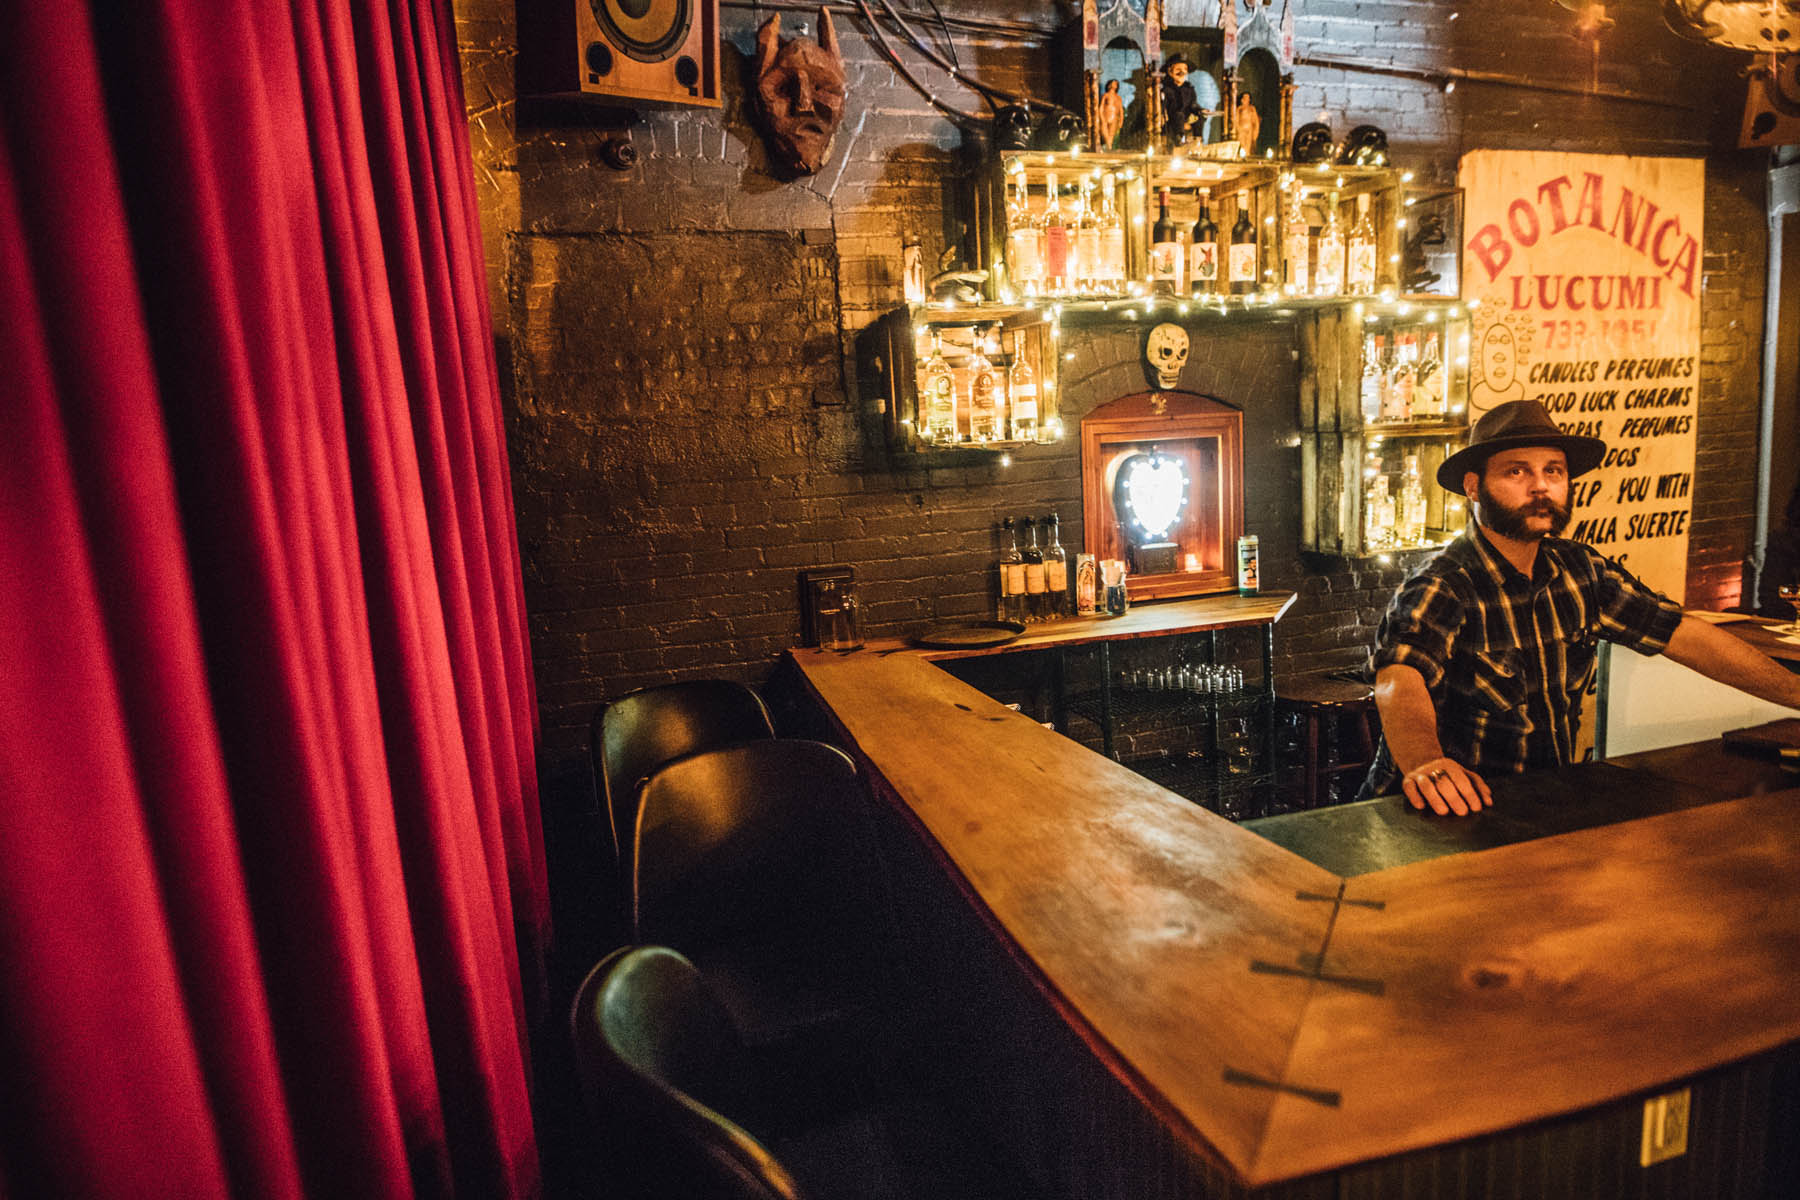 How to Get Into Dallas's Best Speakeasies and Secret Bars